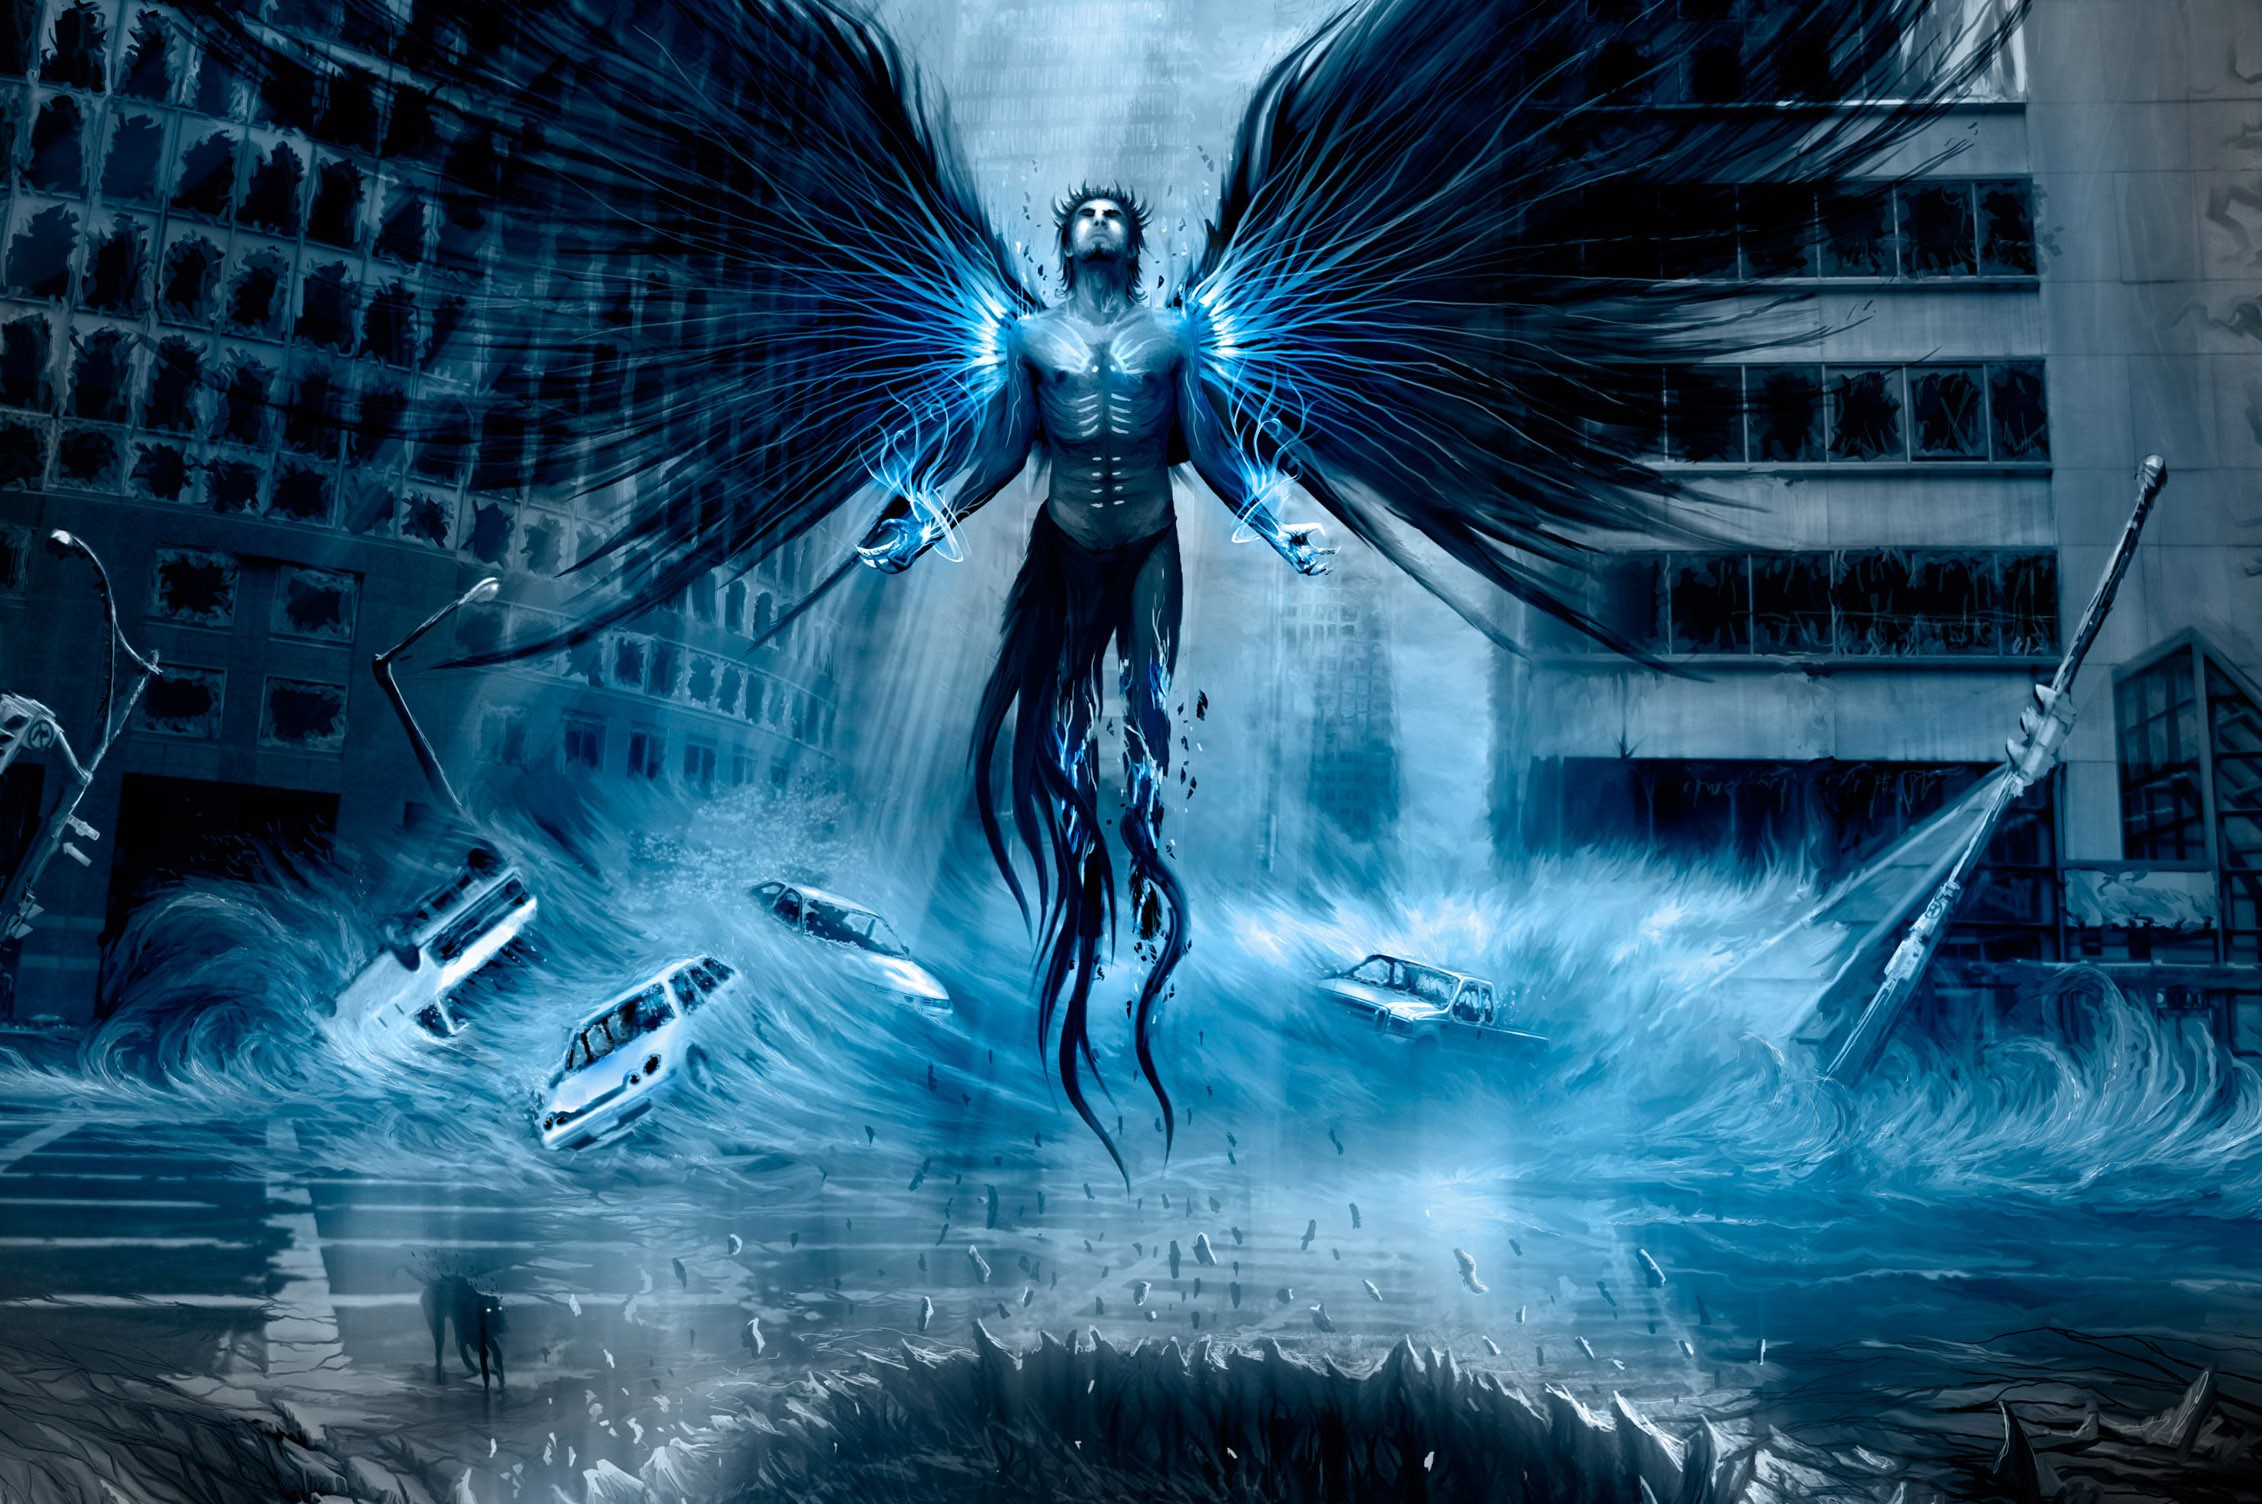 power wallpaper,cg artwork,graphic design,fictional character,darkness,wing